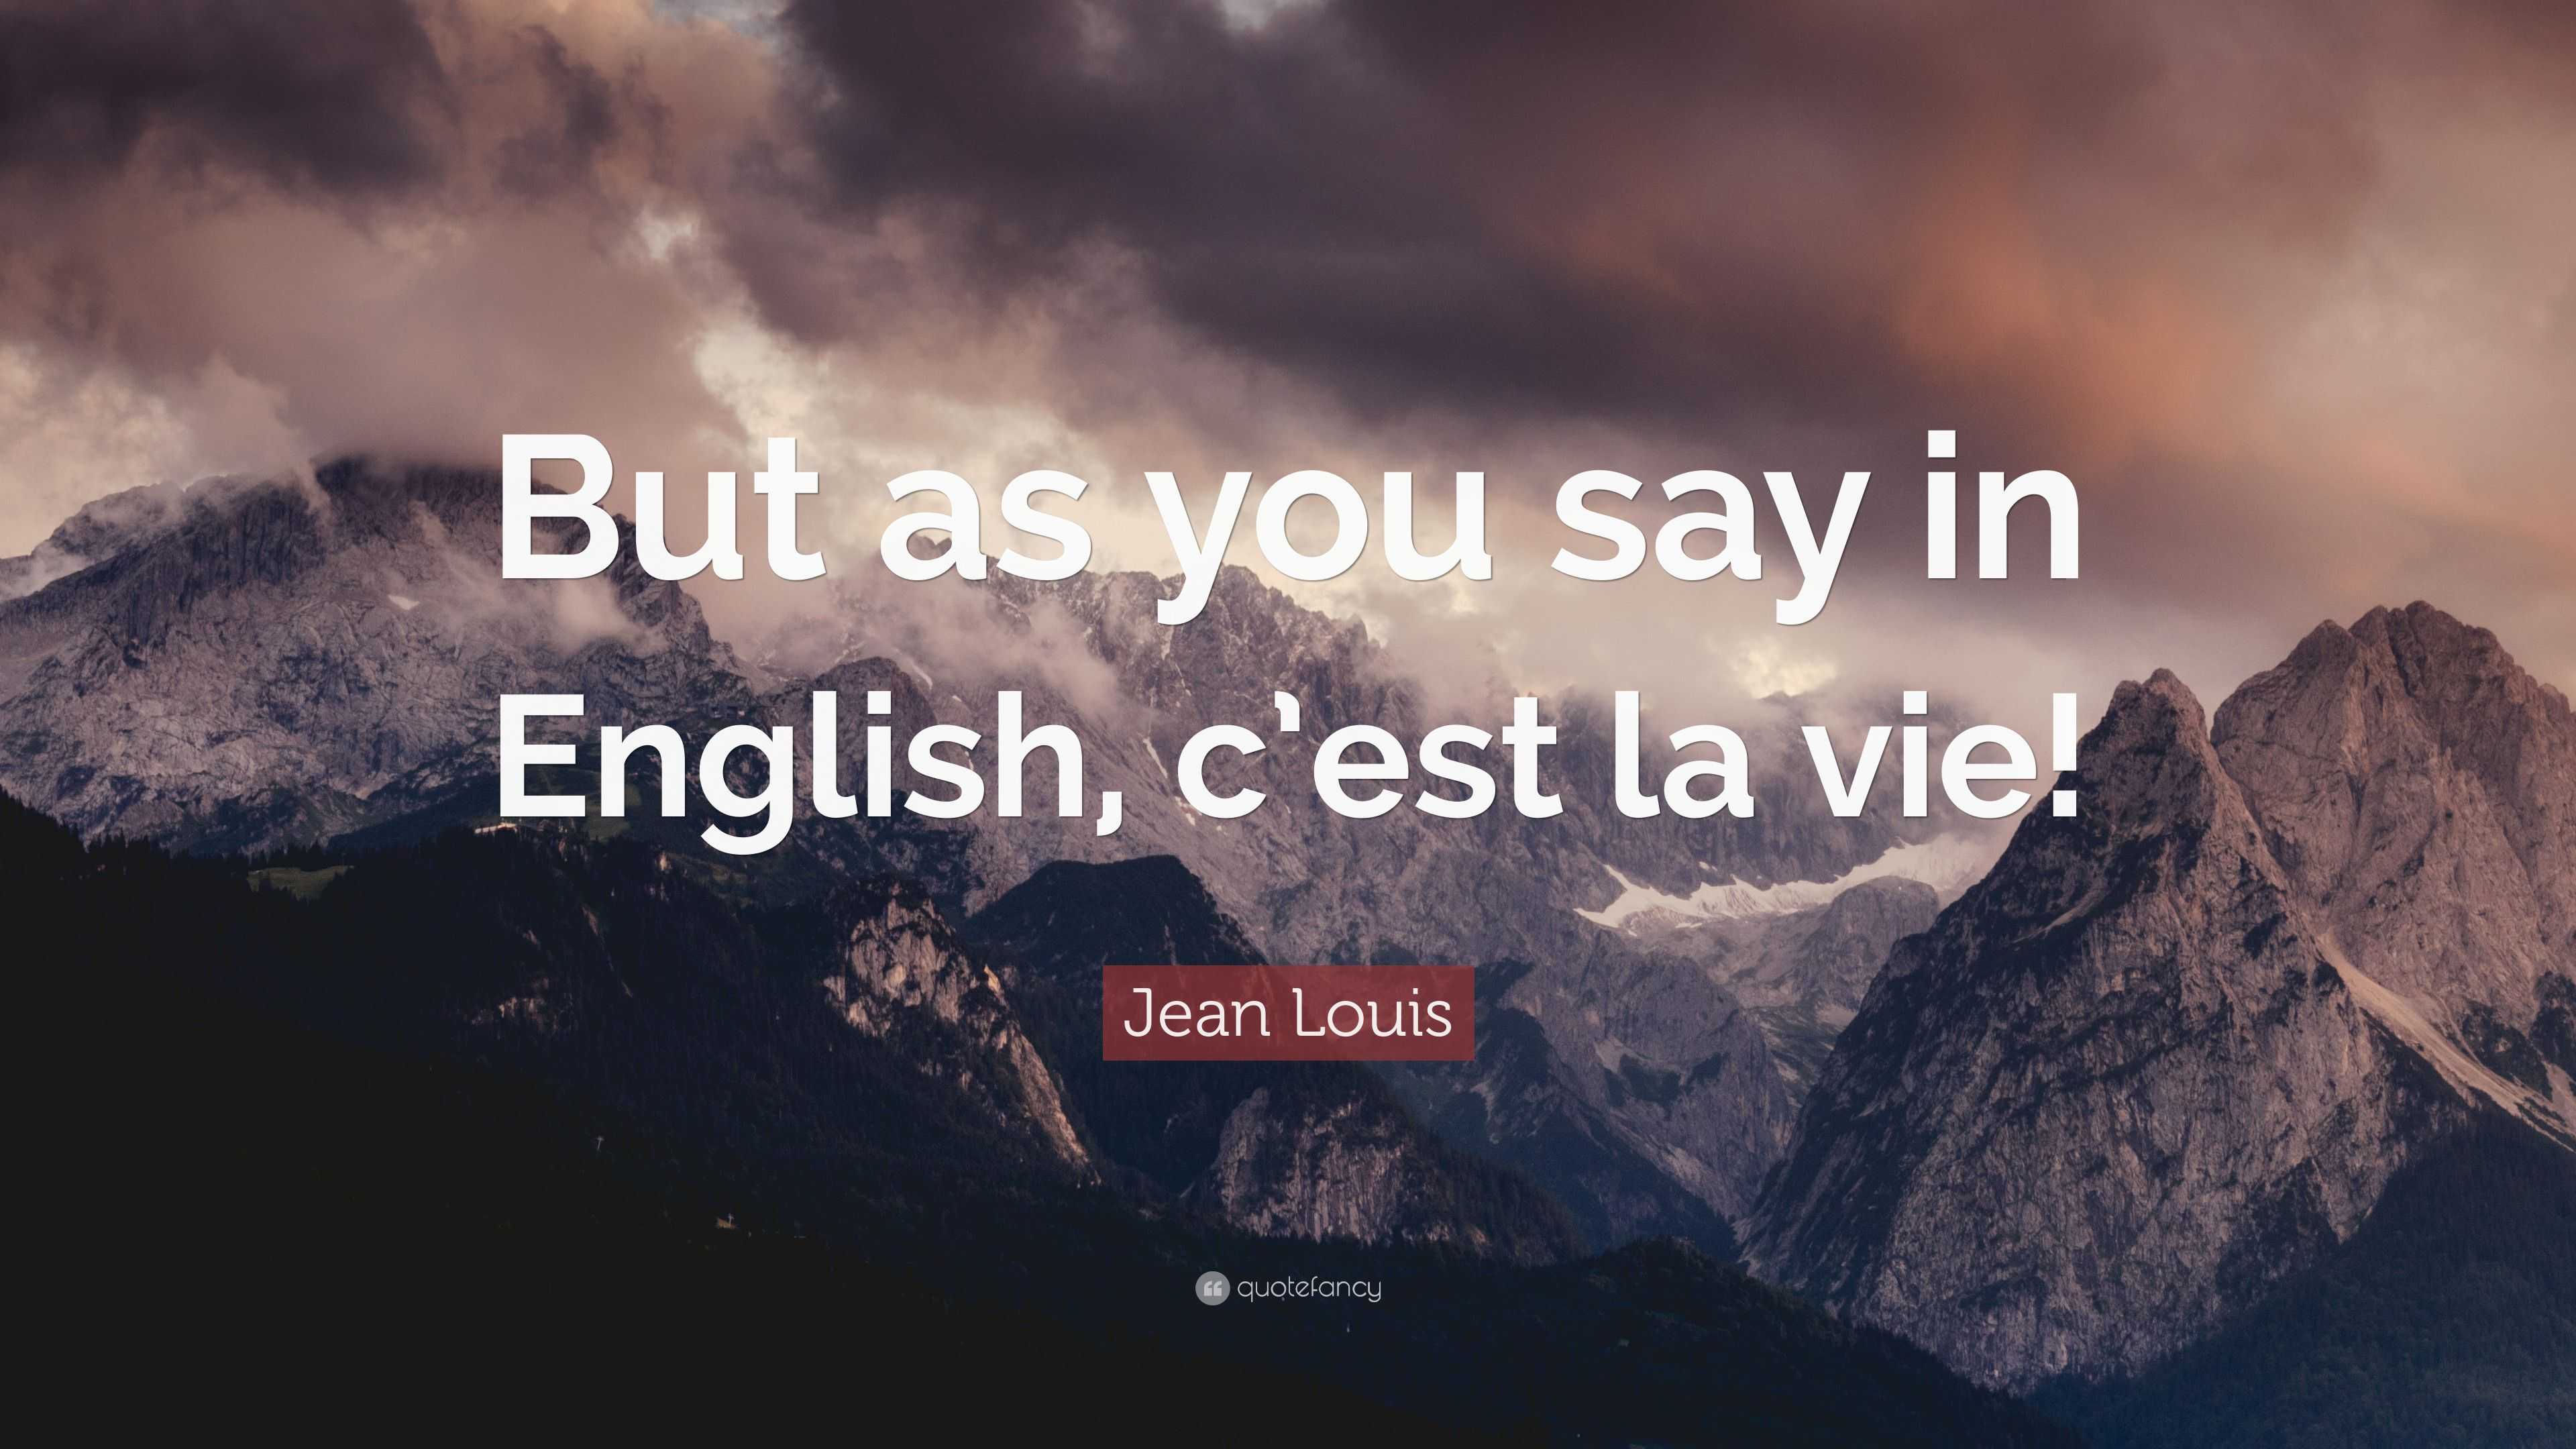 Jean Louis Quote: “But as you say in English, c’est la vie!”